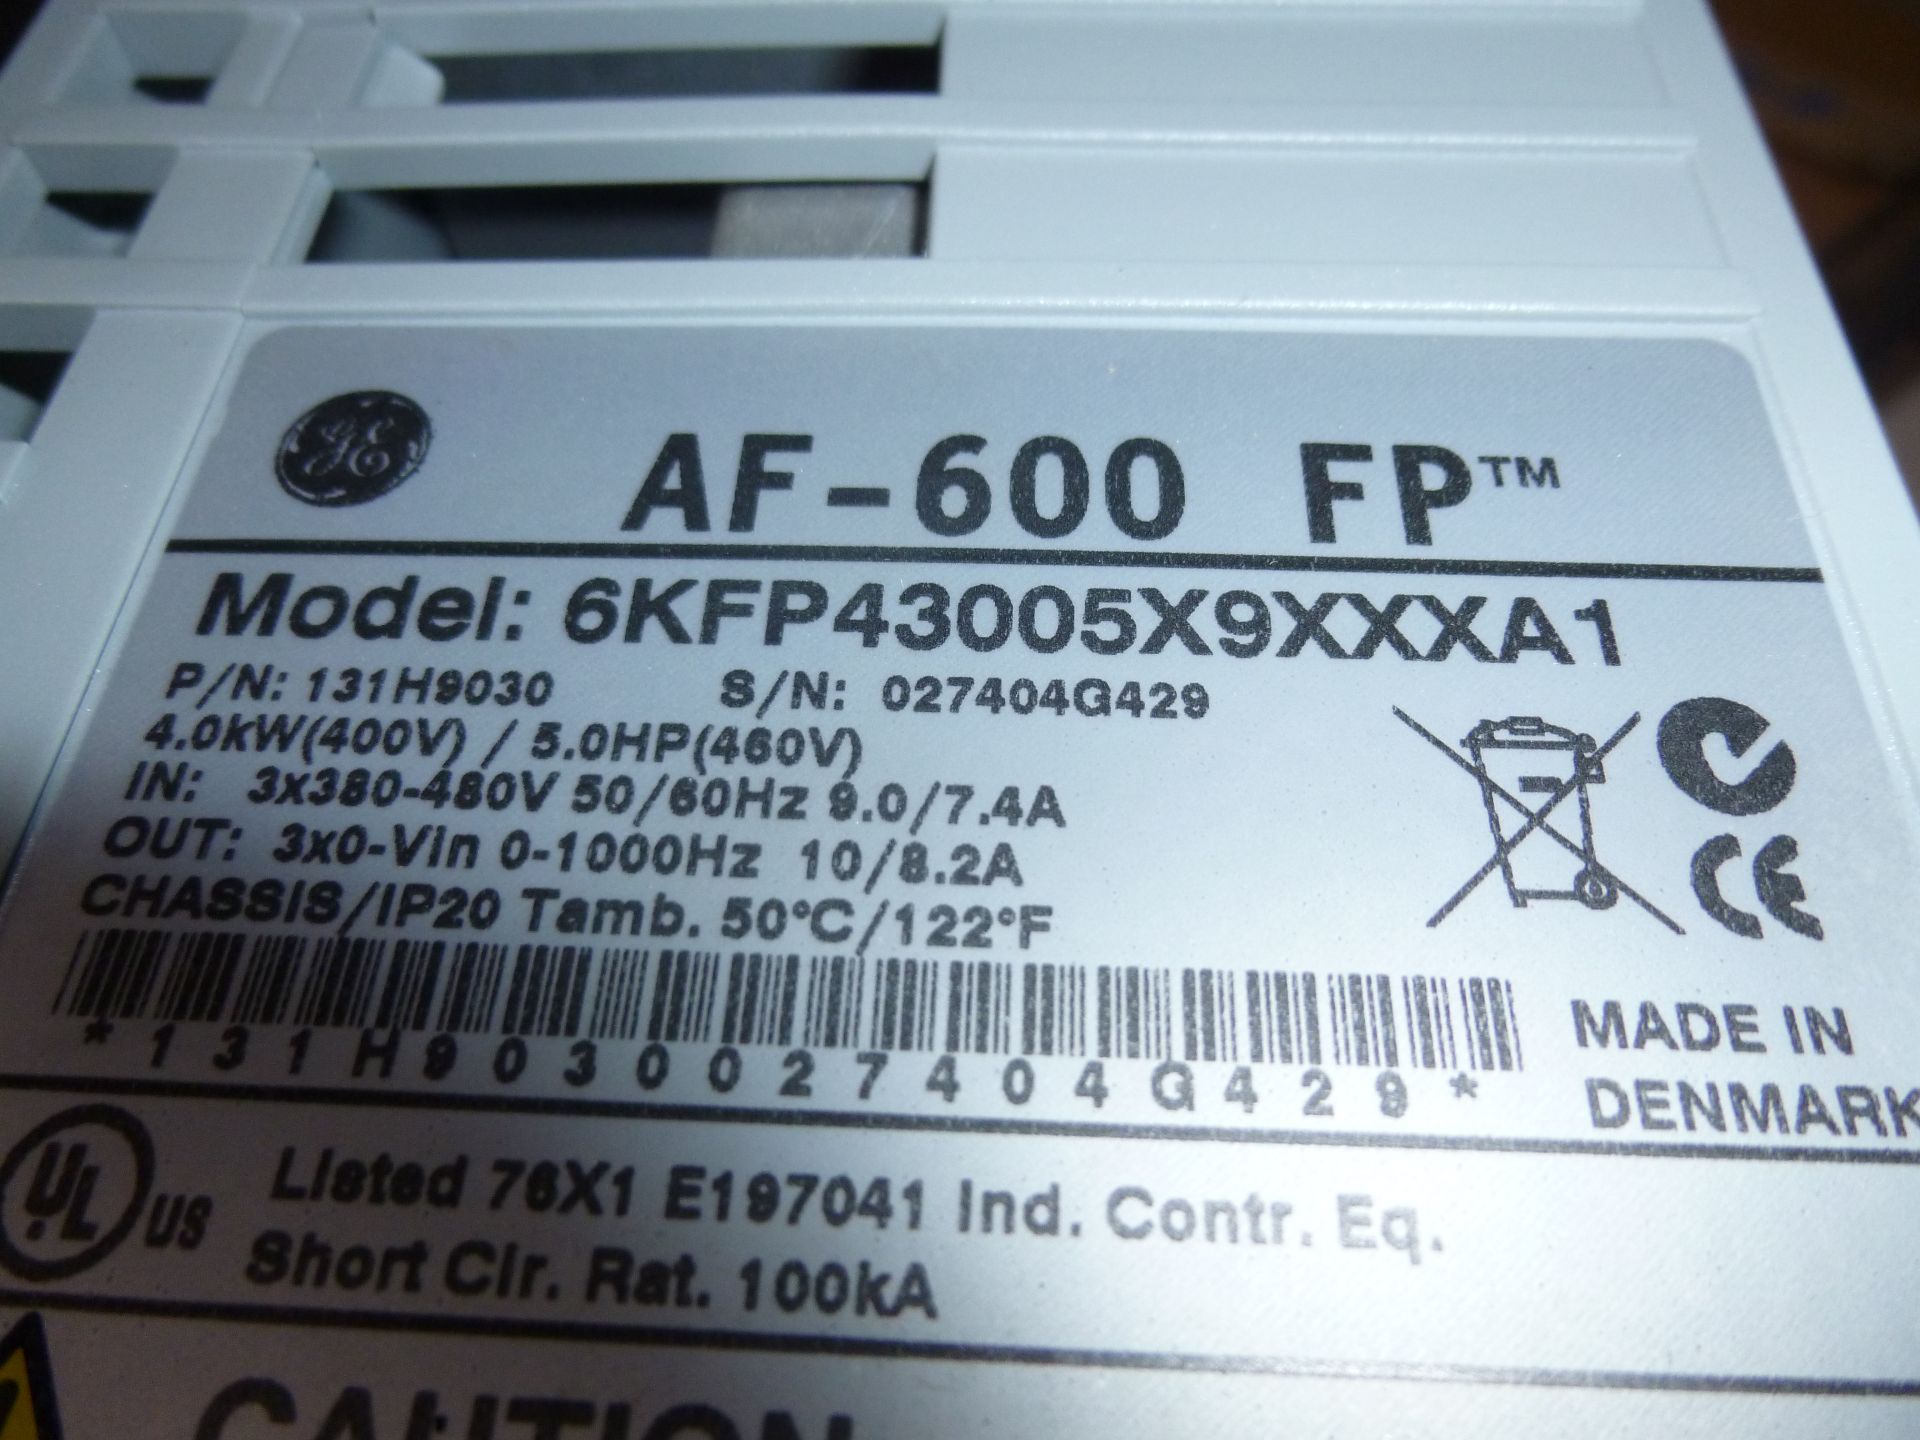 GE drive AF-600 FP, Model 6KFP43005X9XXXA1, new in box, as always with Brolyn LLC auctions, all lots - Image 2 of 2